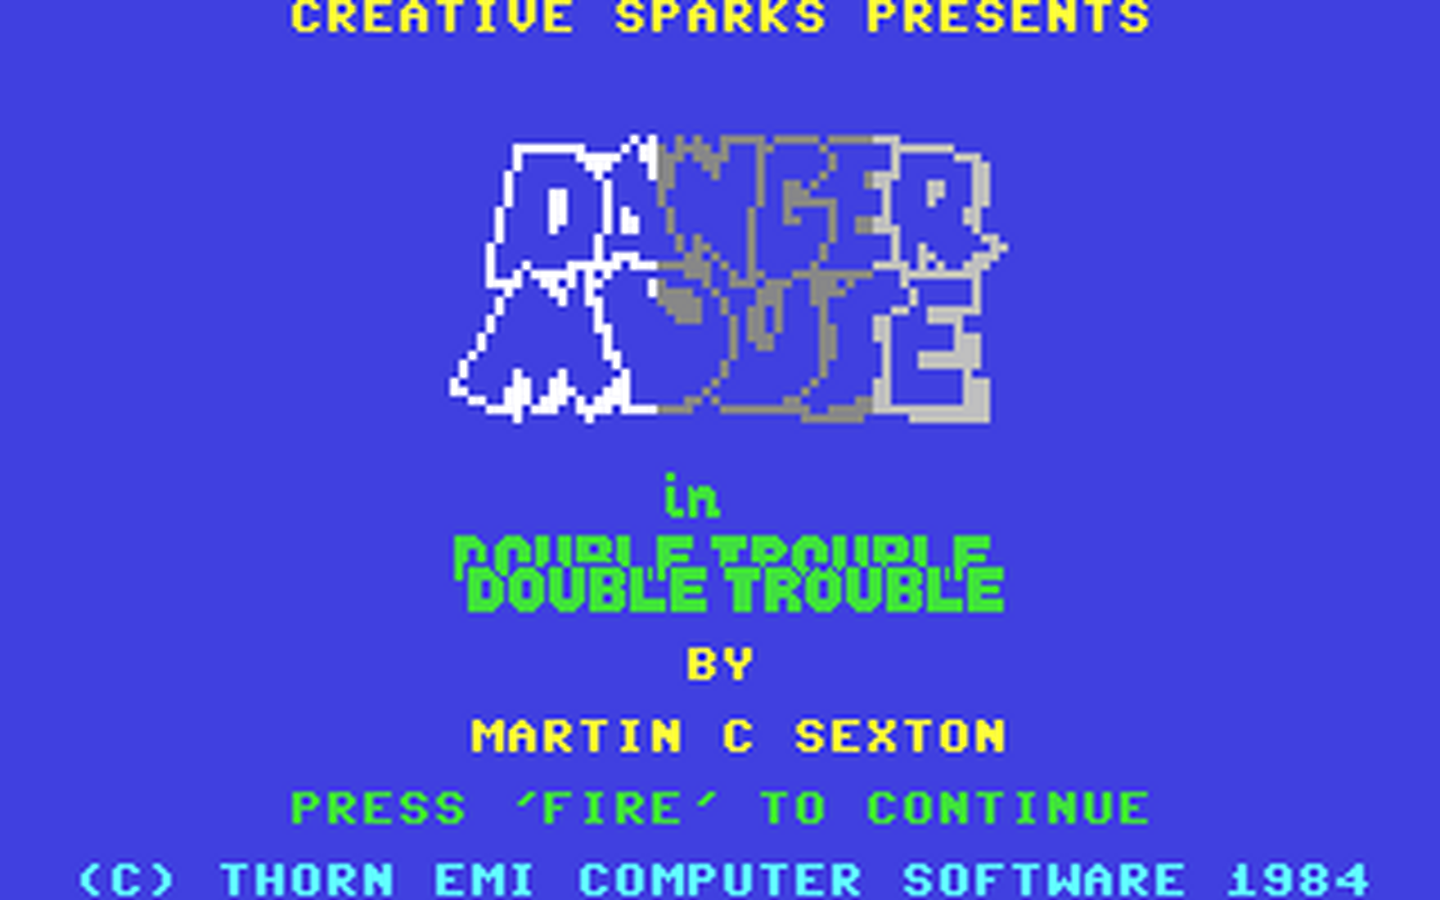 C64 GameBase Danger_Mouse_in_Double_Trouble Creative_Sparks_[Thorn_Emi_Computer_Software] 1984